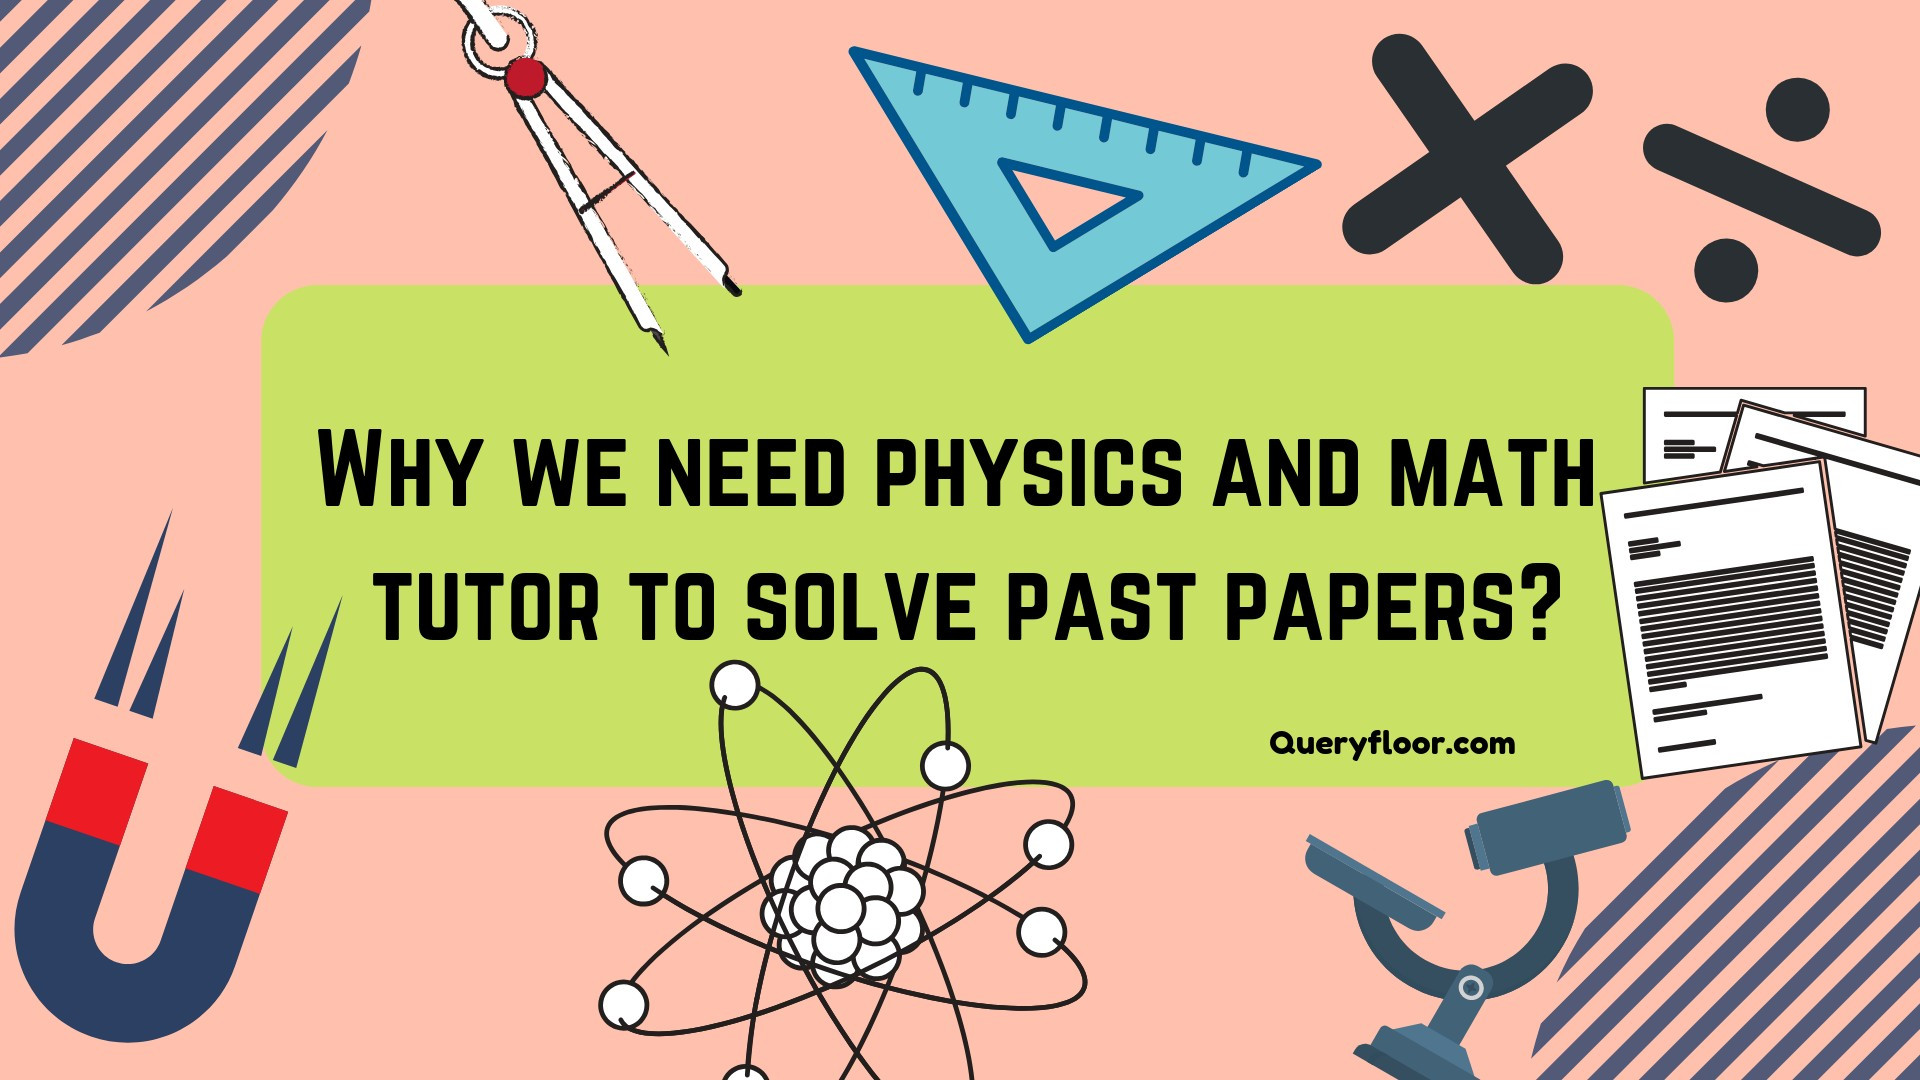 Why we need physics and math tutor to solve past papers?